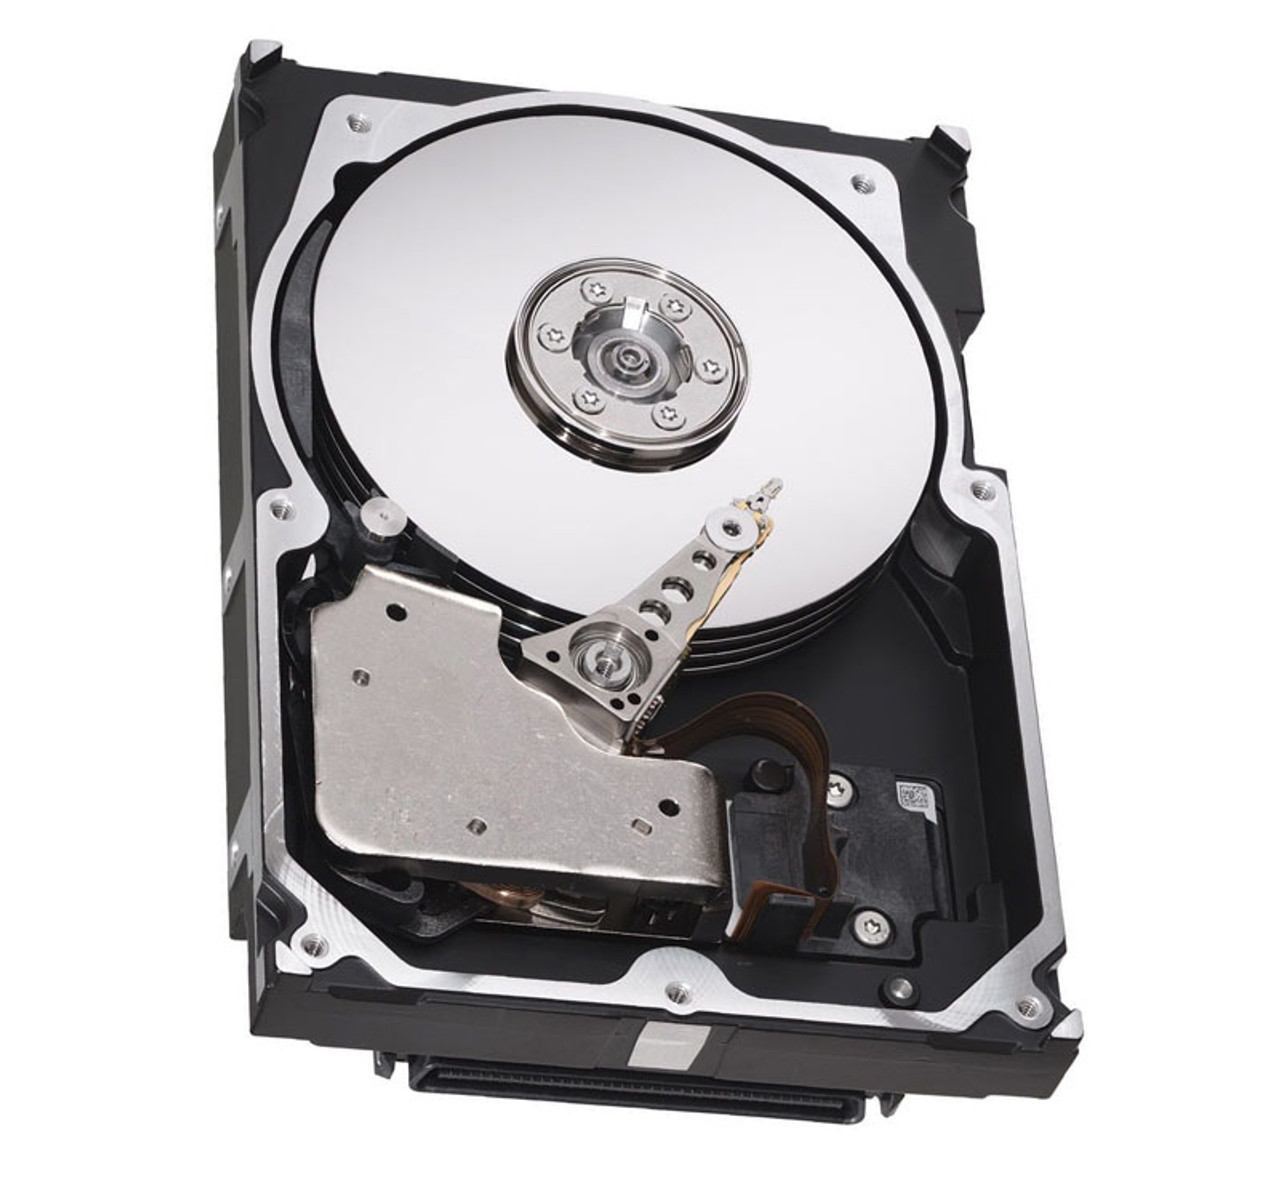 3703716 - Sun 18.2GB 7200RPM Ultra-160 SCSI Hot-Pluggable Single-Ended 80-Pin 3.5-inch Hard Drive